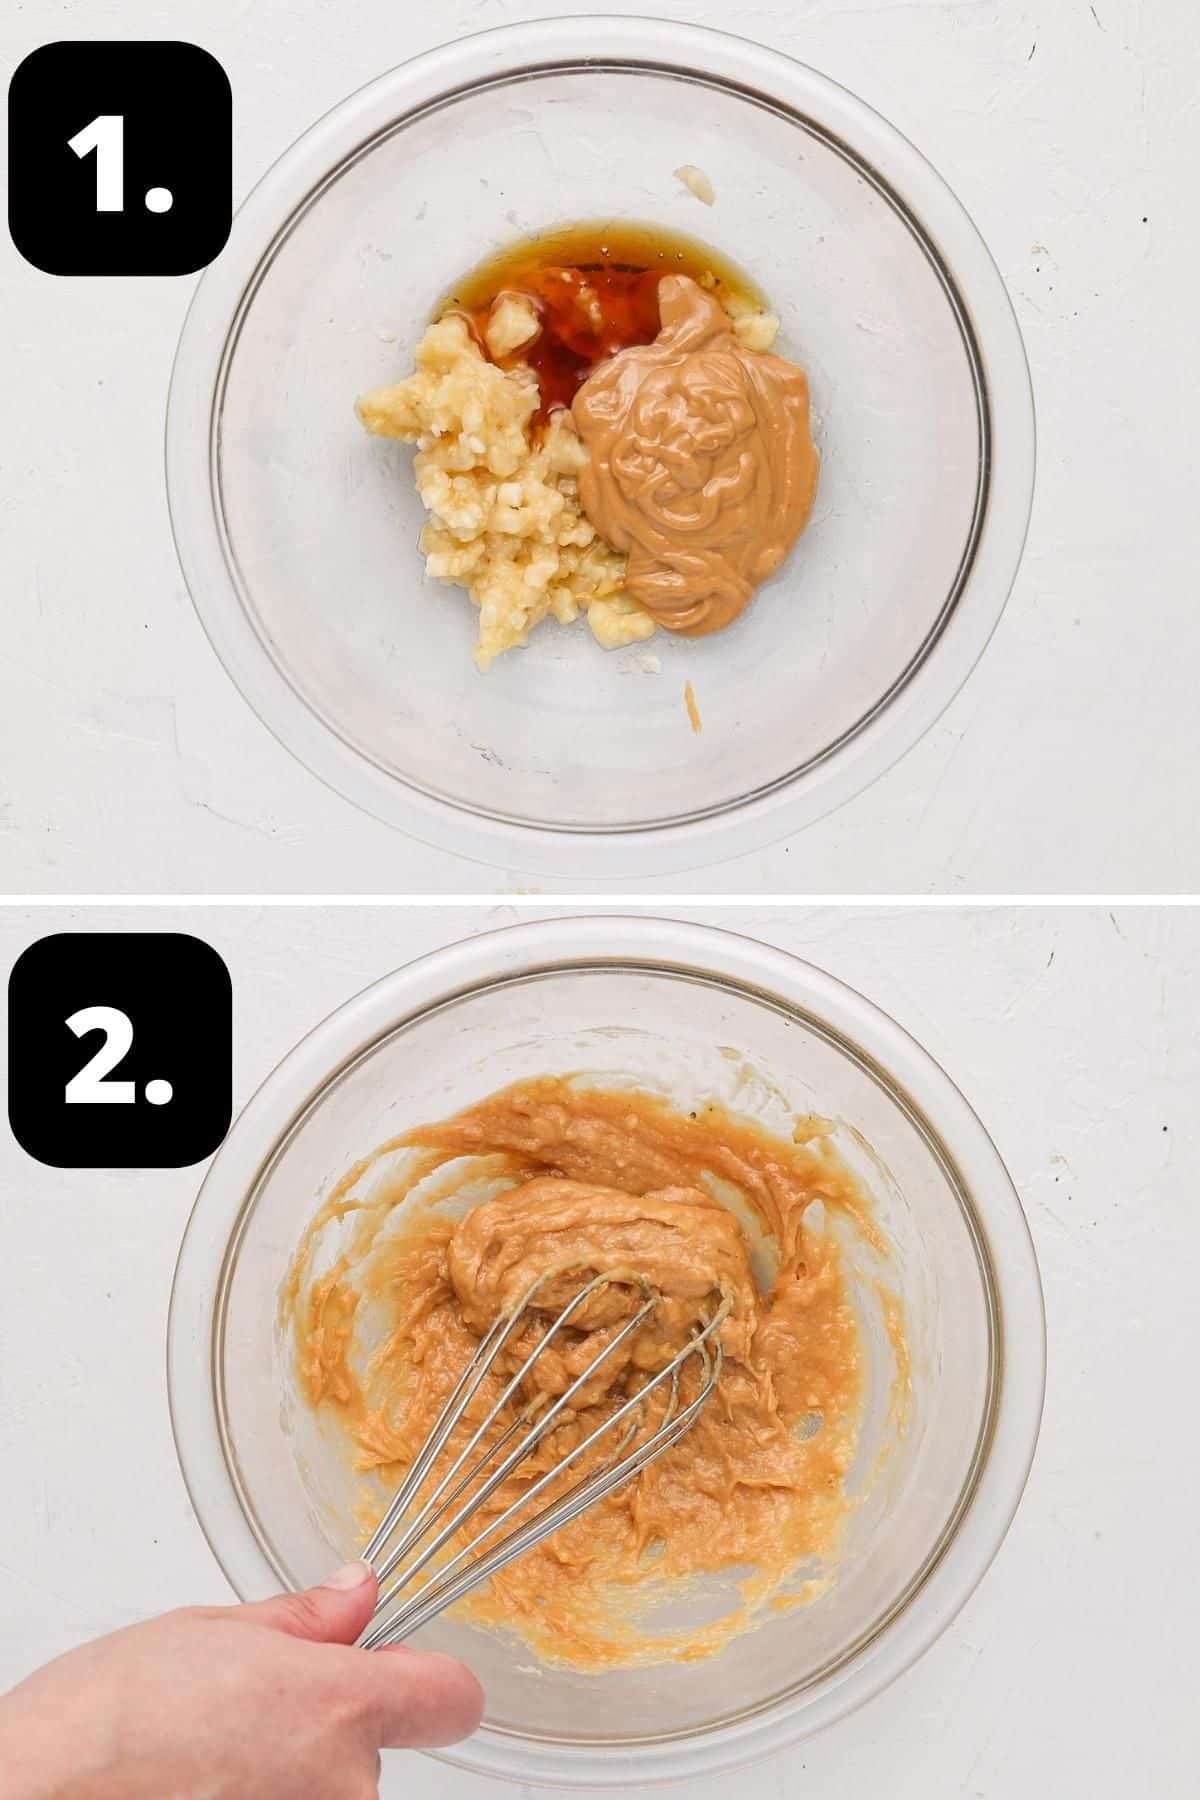 Steps 1-2 of preparing this recipe - adding the maple syrup, banana and peanut butter to a bowl and whisking the mixture until smooth.